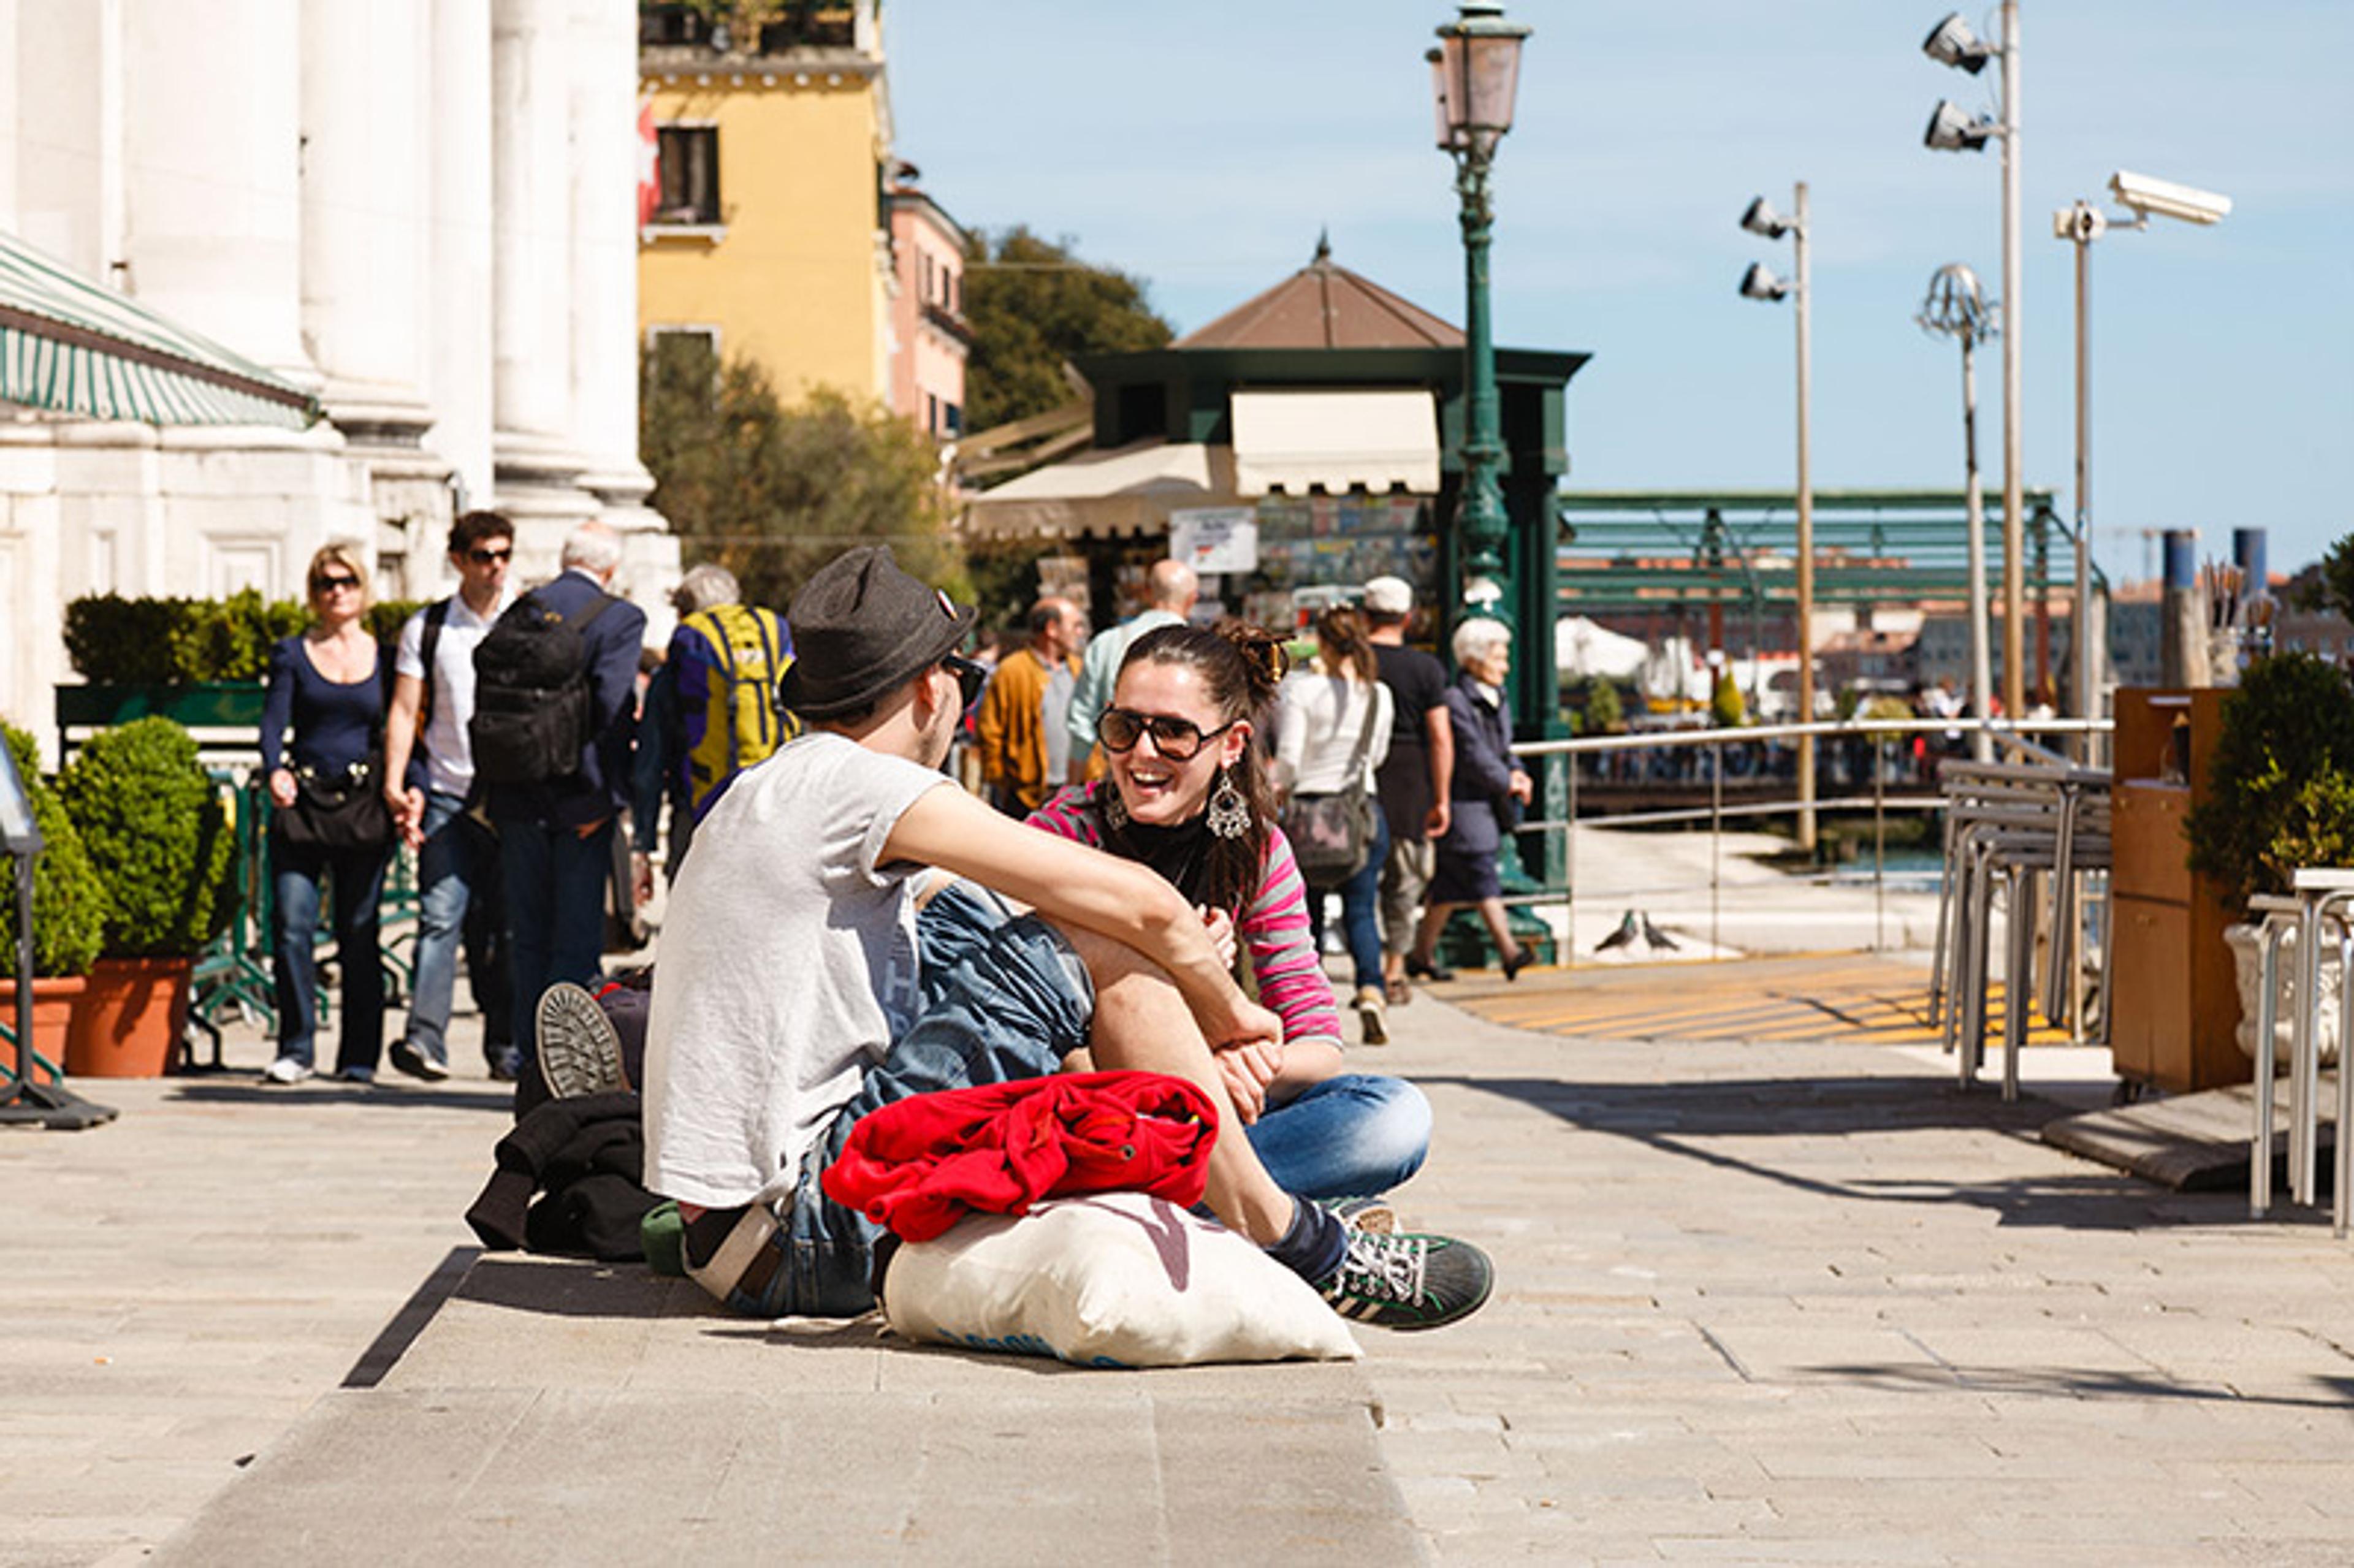 A happy young couple sitting and chatting on a wall in the sunshine. They are in focus while people in the background are defocused